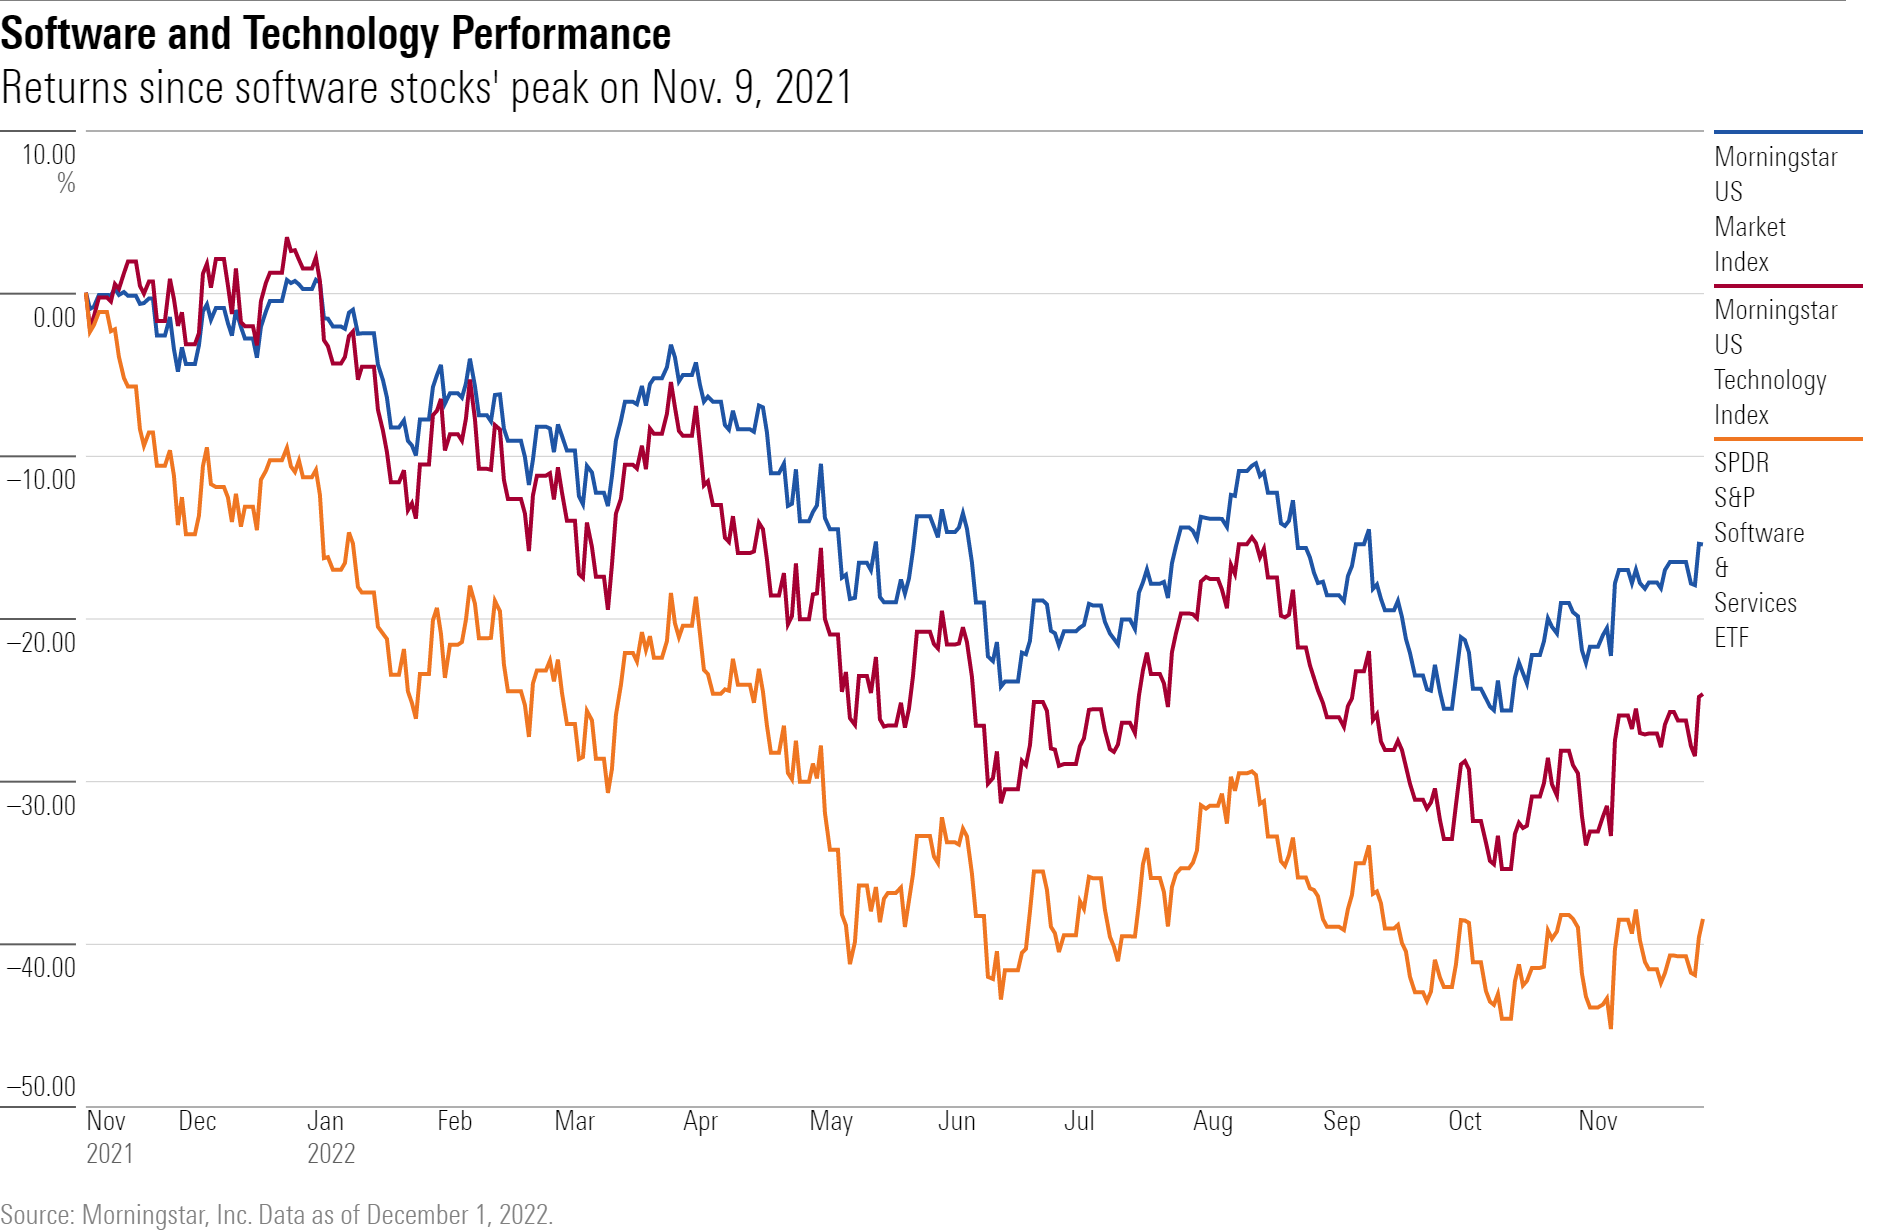 A line chart showing the performance of software stocks since their last peak on Nov. 9, 2021.